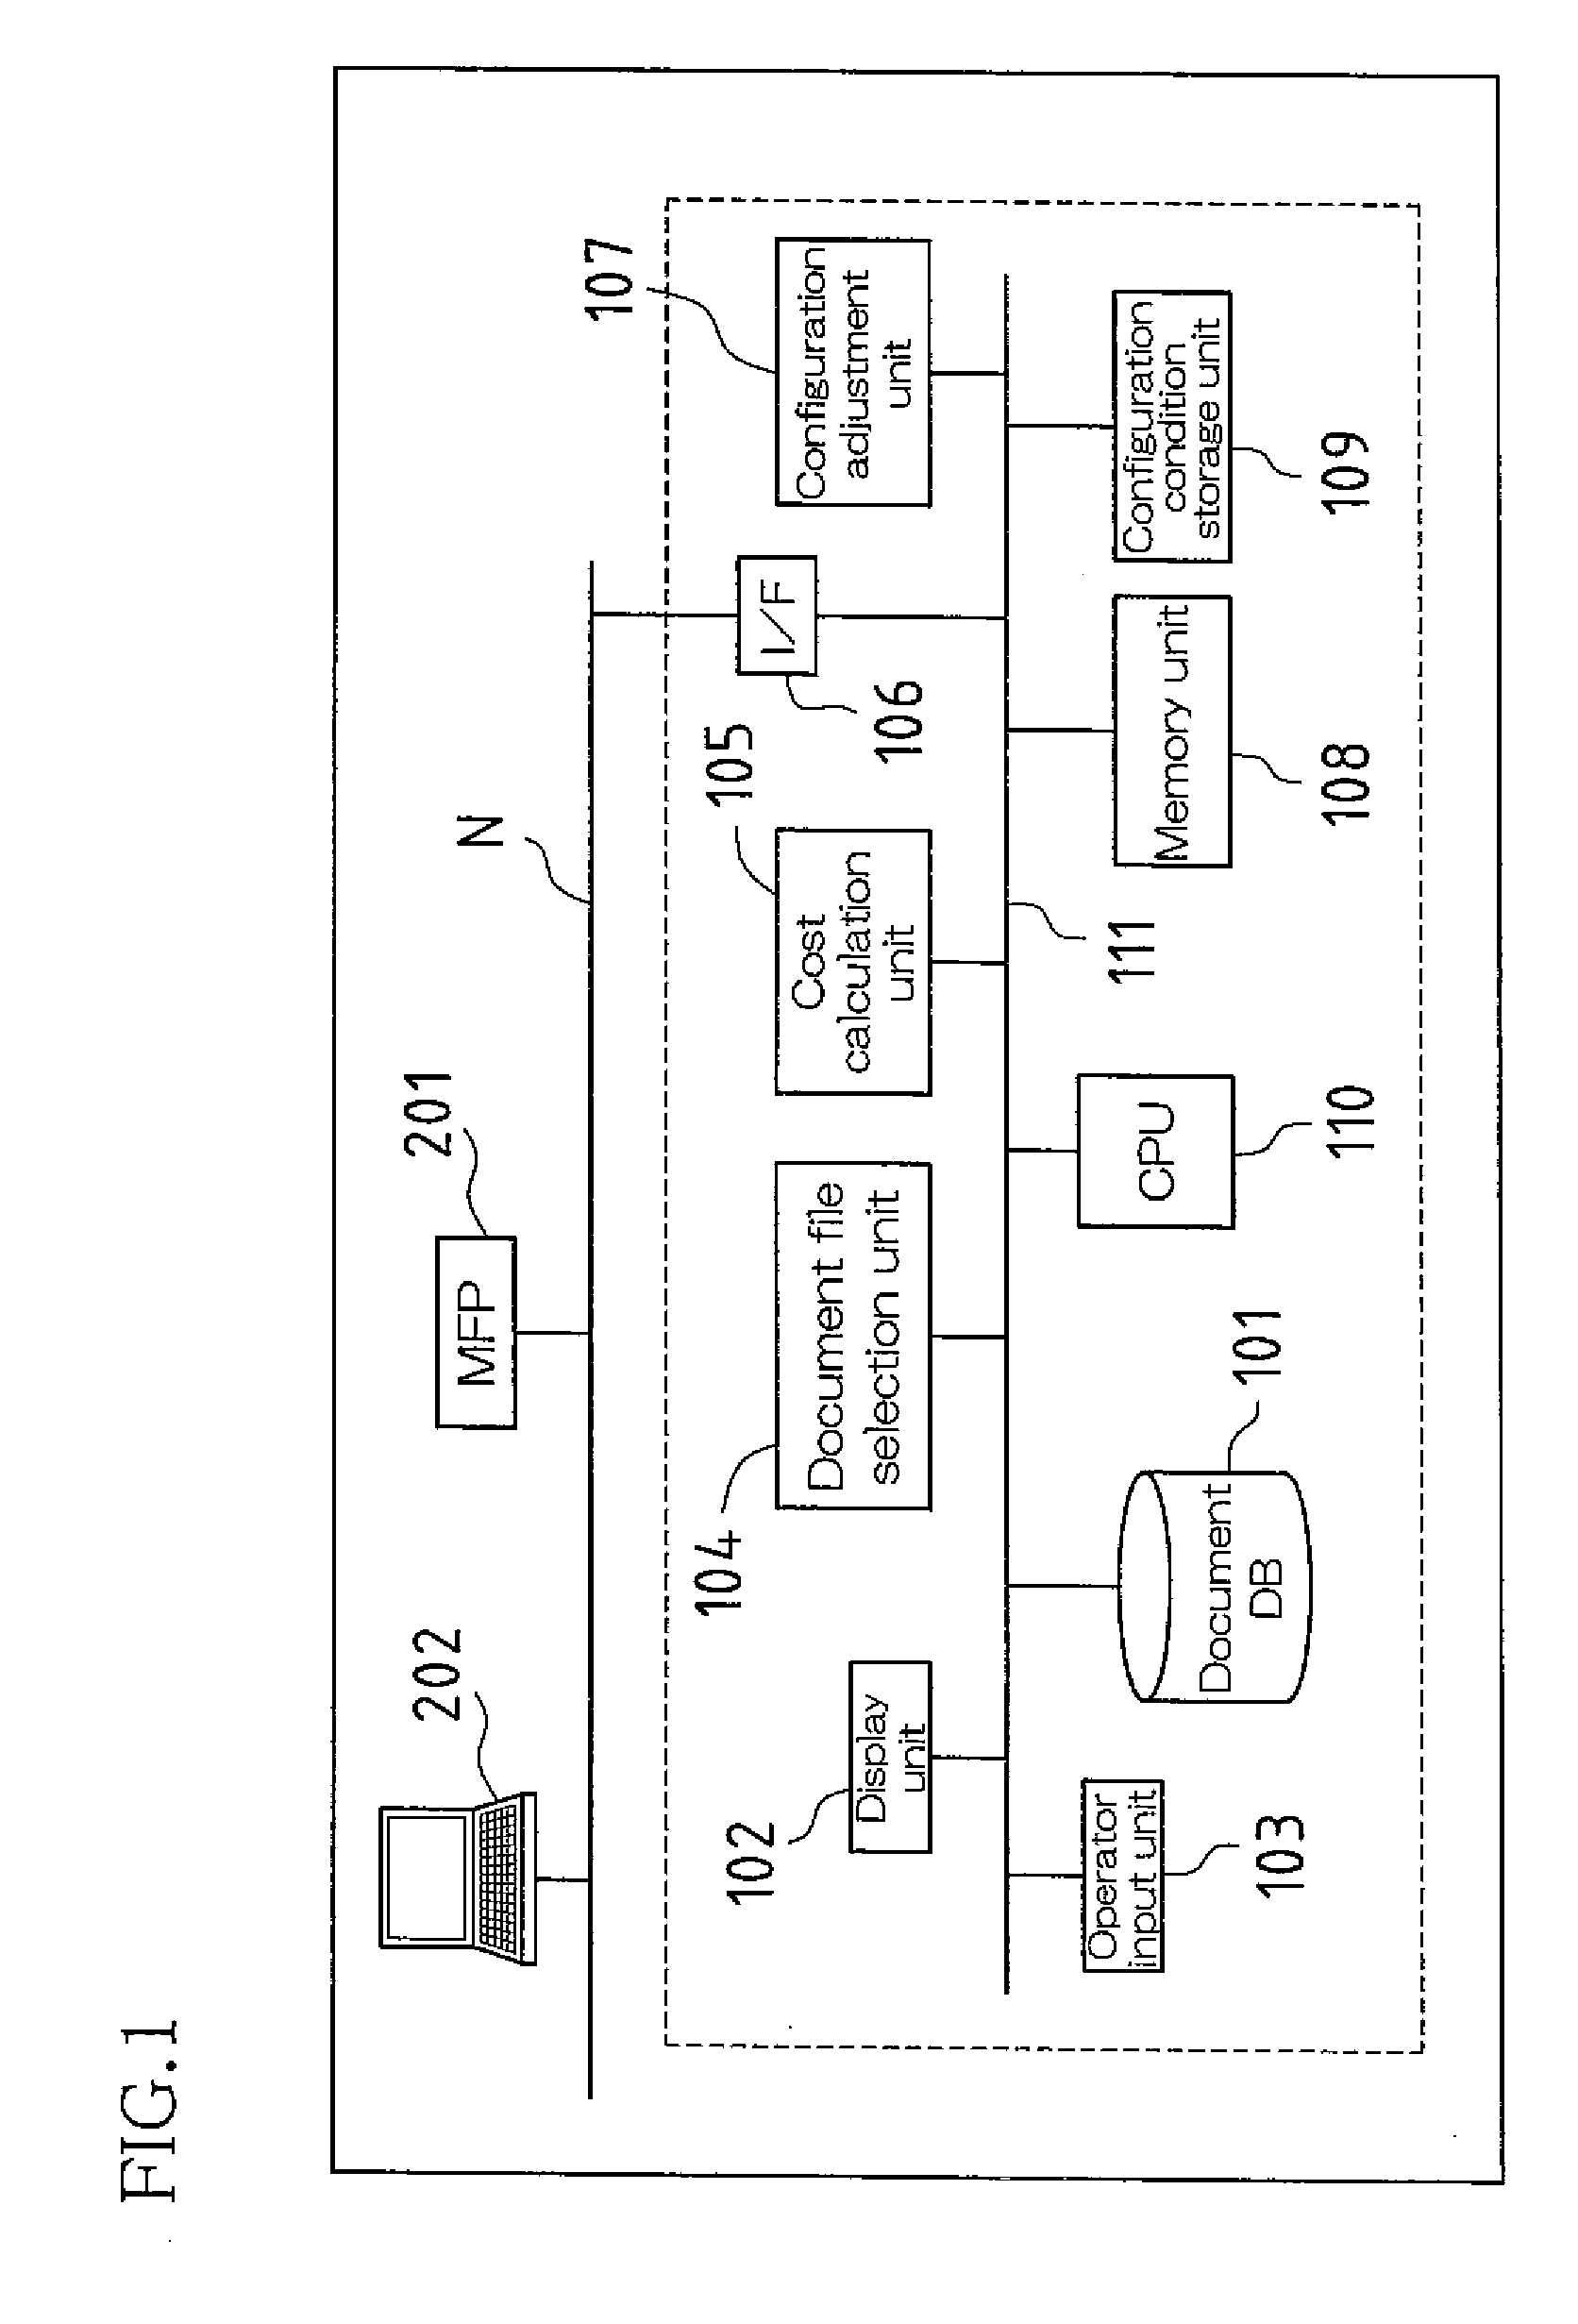 Electronic filing system